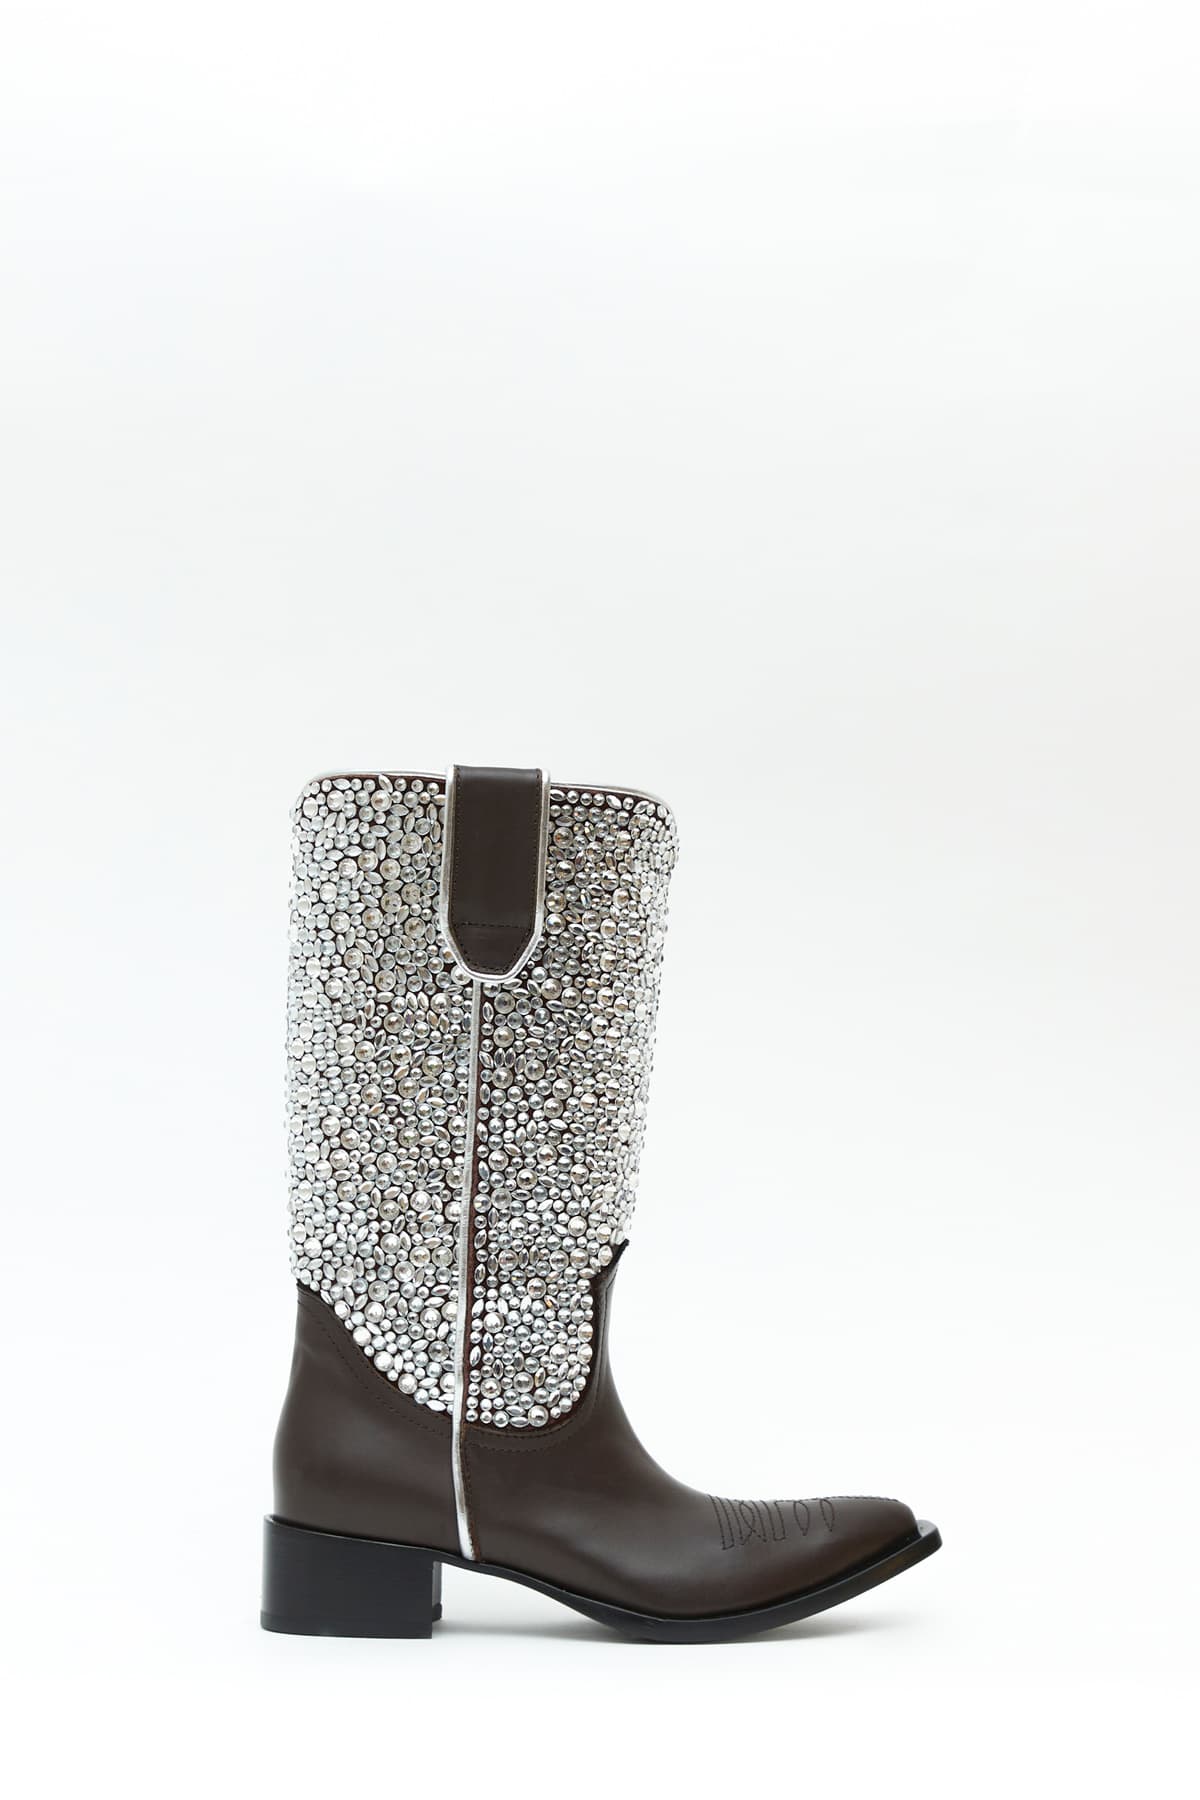 Sideview of Taxhoney boot in nutella with crystal from the Haus of Honey fall-winter 2023-24